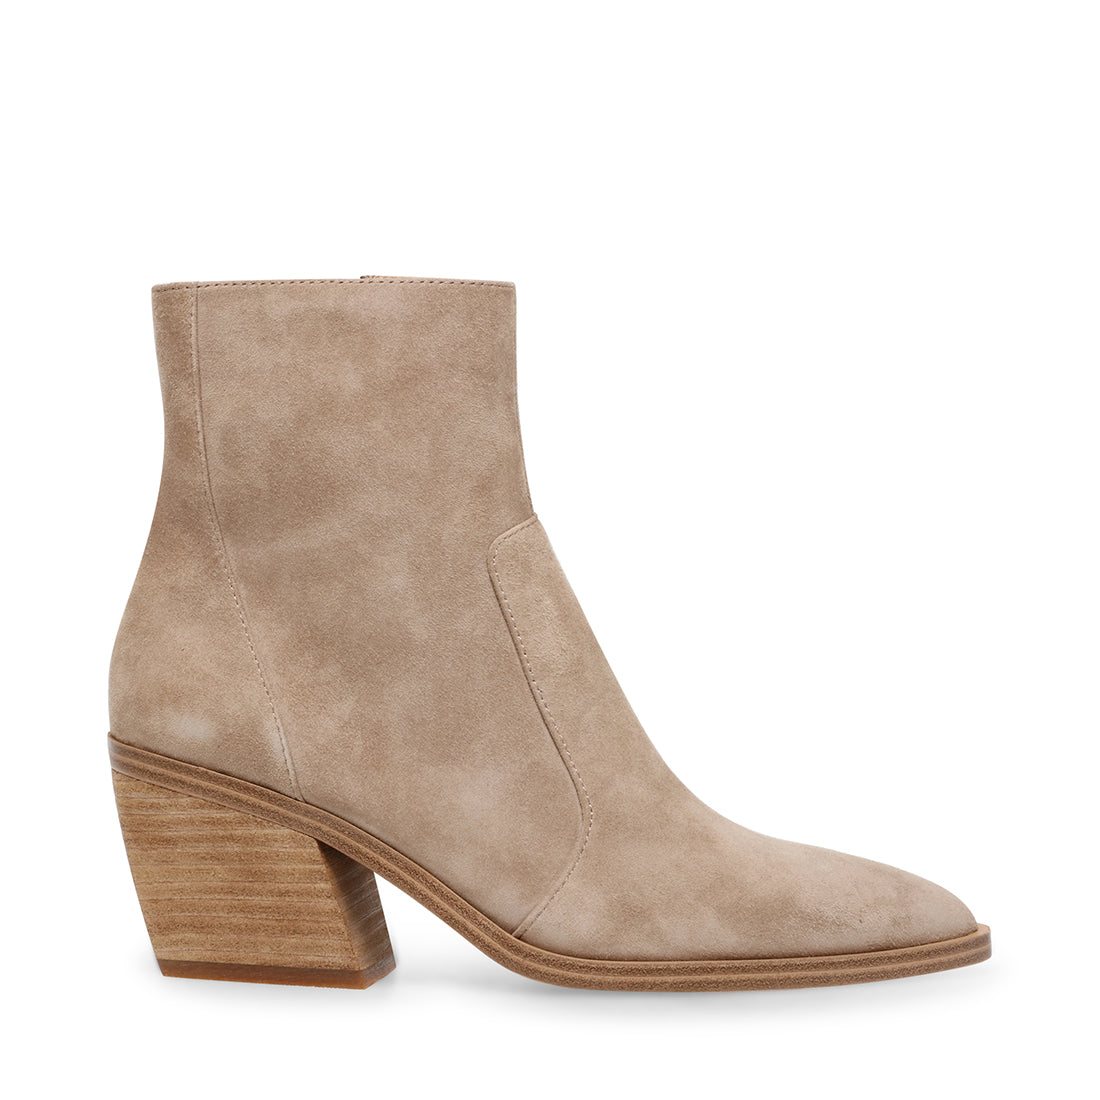 MALLORIE TAUPE SUEDE – Steve Madden